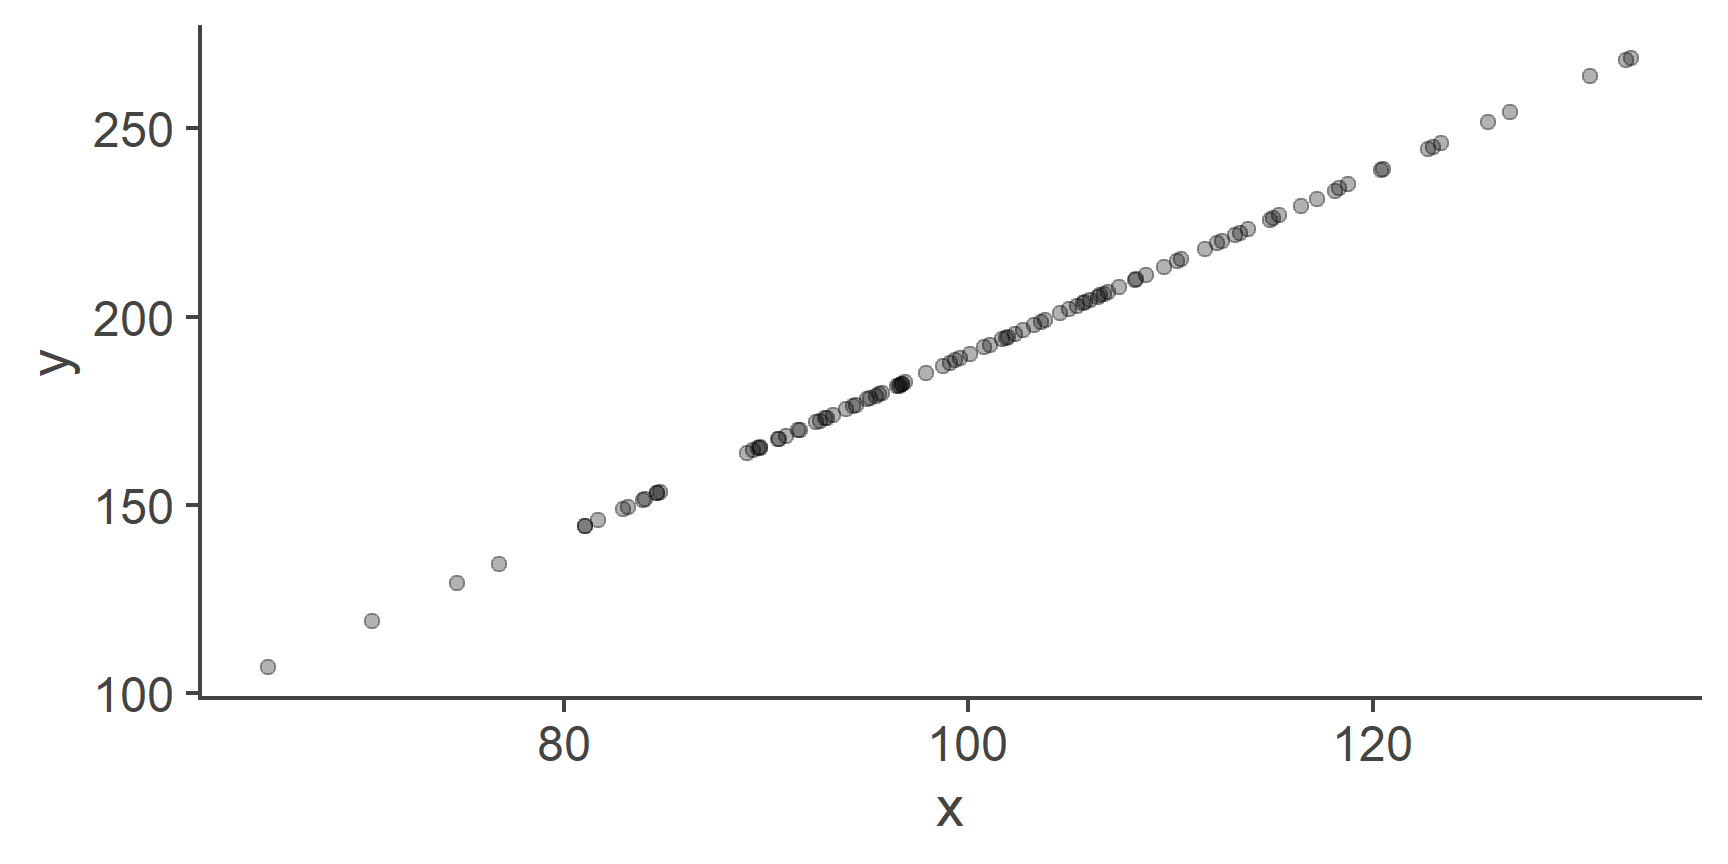 A perfect linear relationship between two variables